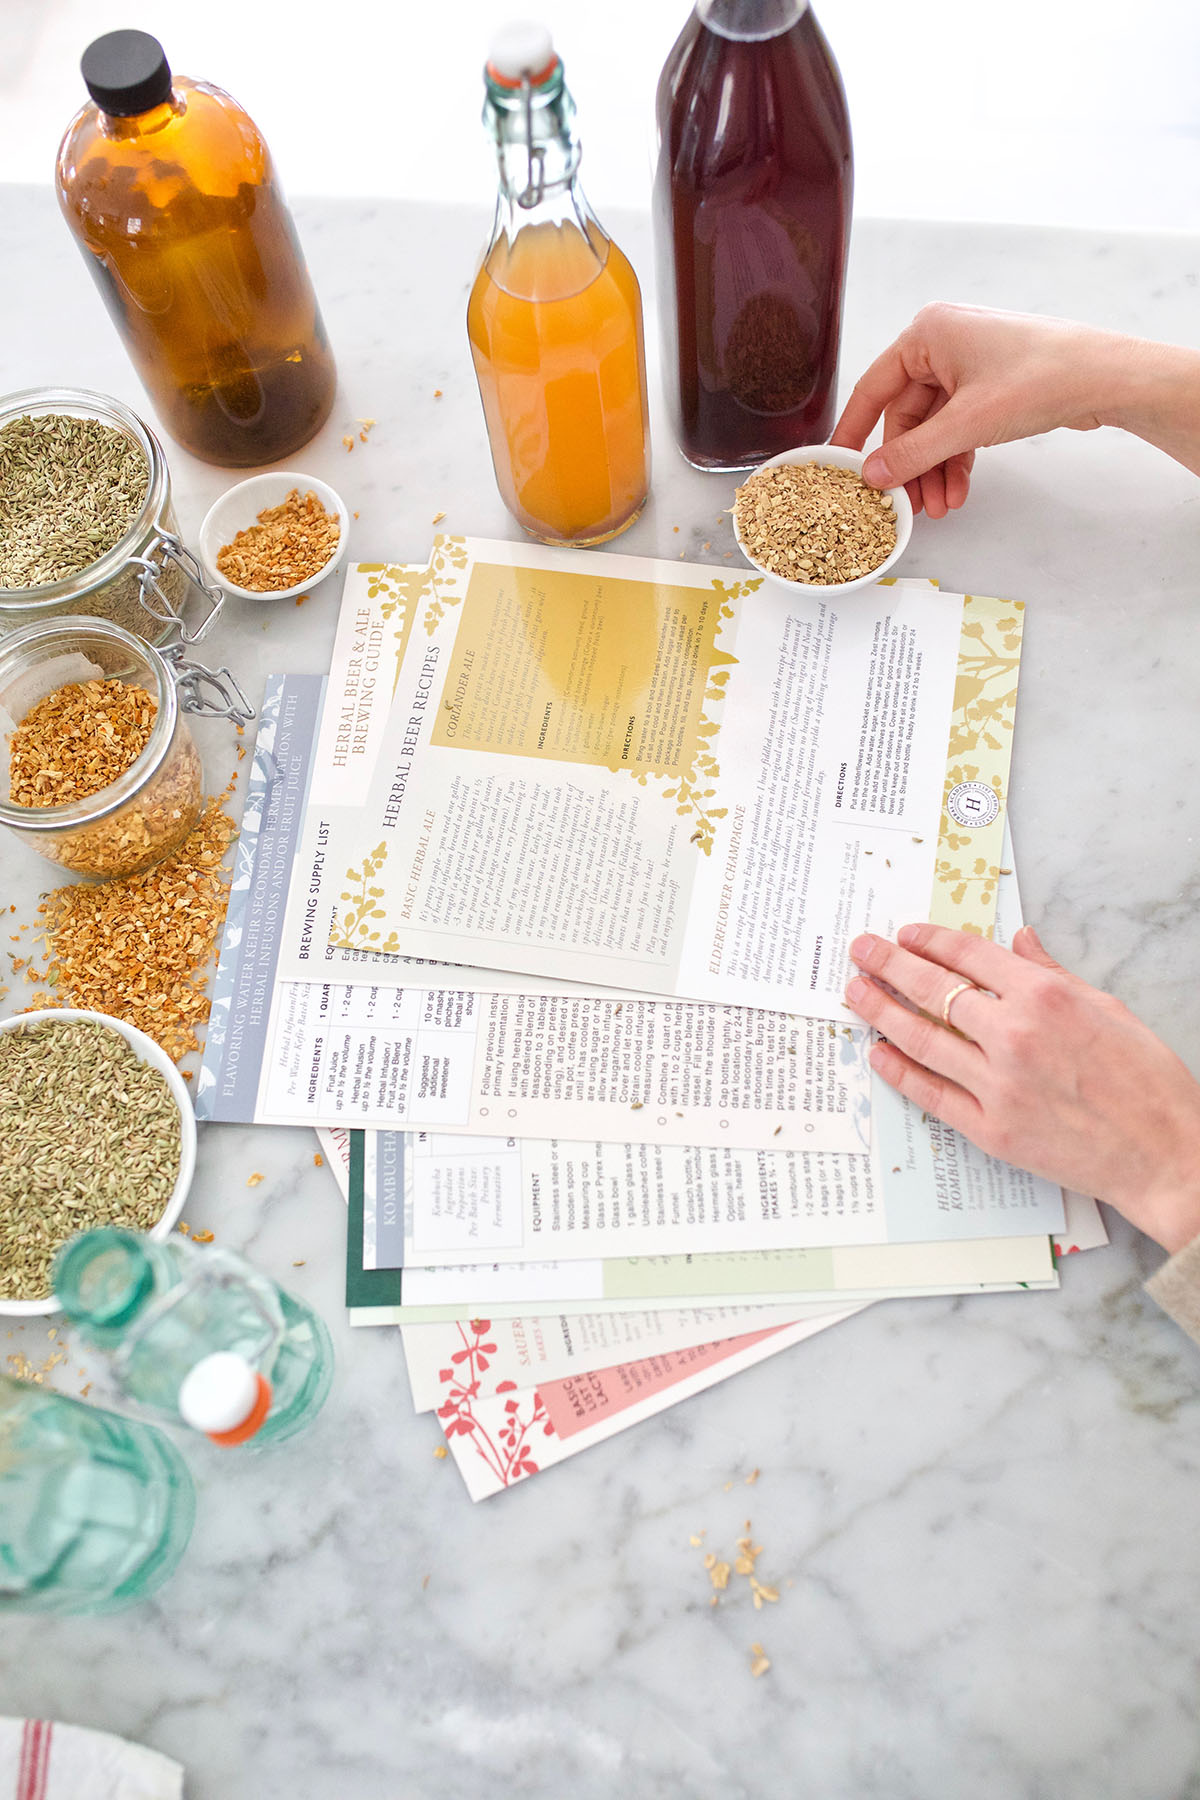 Win Enrollment To The Craft Of Herbal Fermentation Course | Herbal Academy | Spring is here, and we are giving away The Craft Of Herbal Fermentation course and one set of fermentation tutorial and recipe guides to one lucky winner!